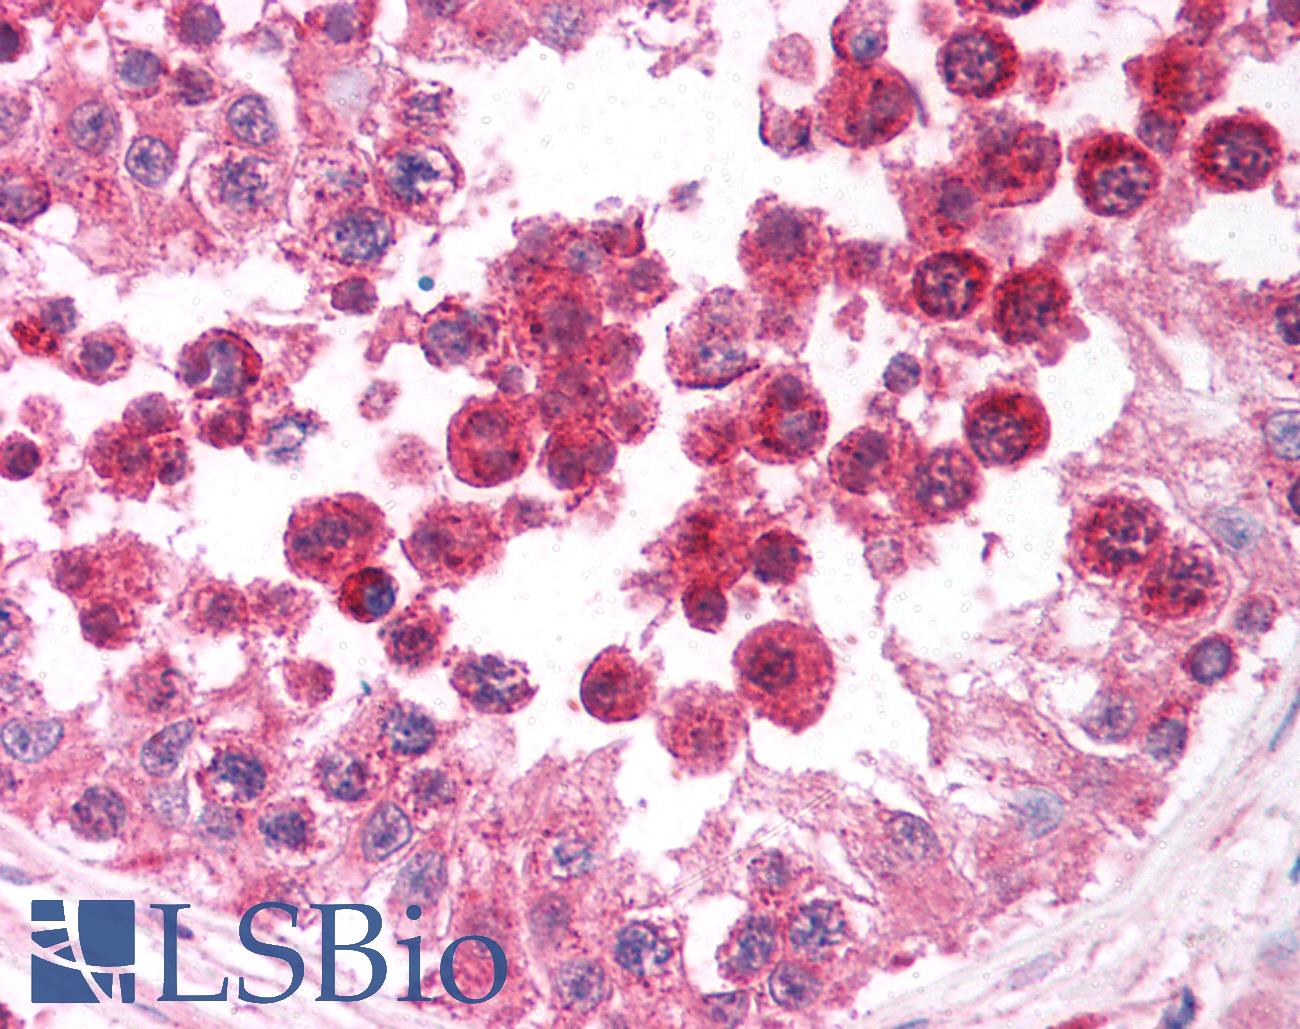 DIABLO / SMAC Antibody - Anti-DIABLO / SMAC antibody IHC of human testis. Immunohistochemistry of formalin-fixed, paraffin-embedded tissue after heat-induced antigen retrieval. Antibody concentration 5 ug/ml.